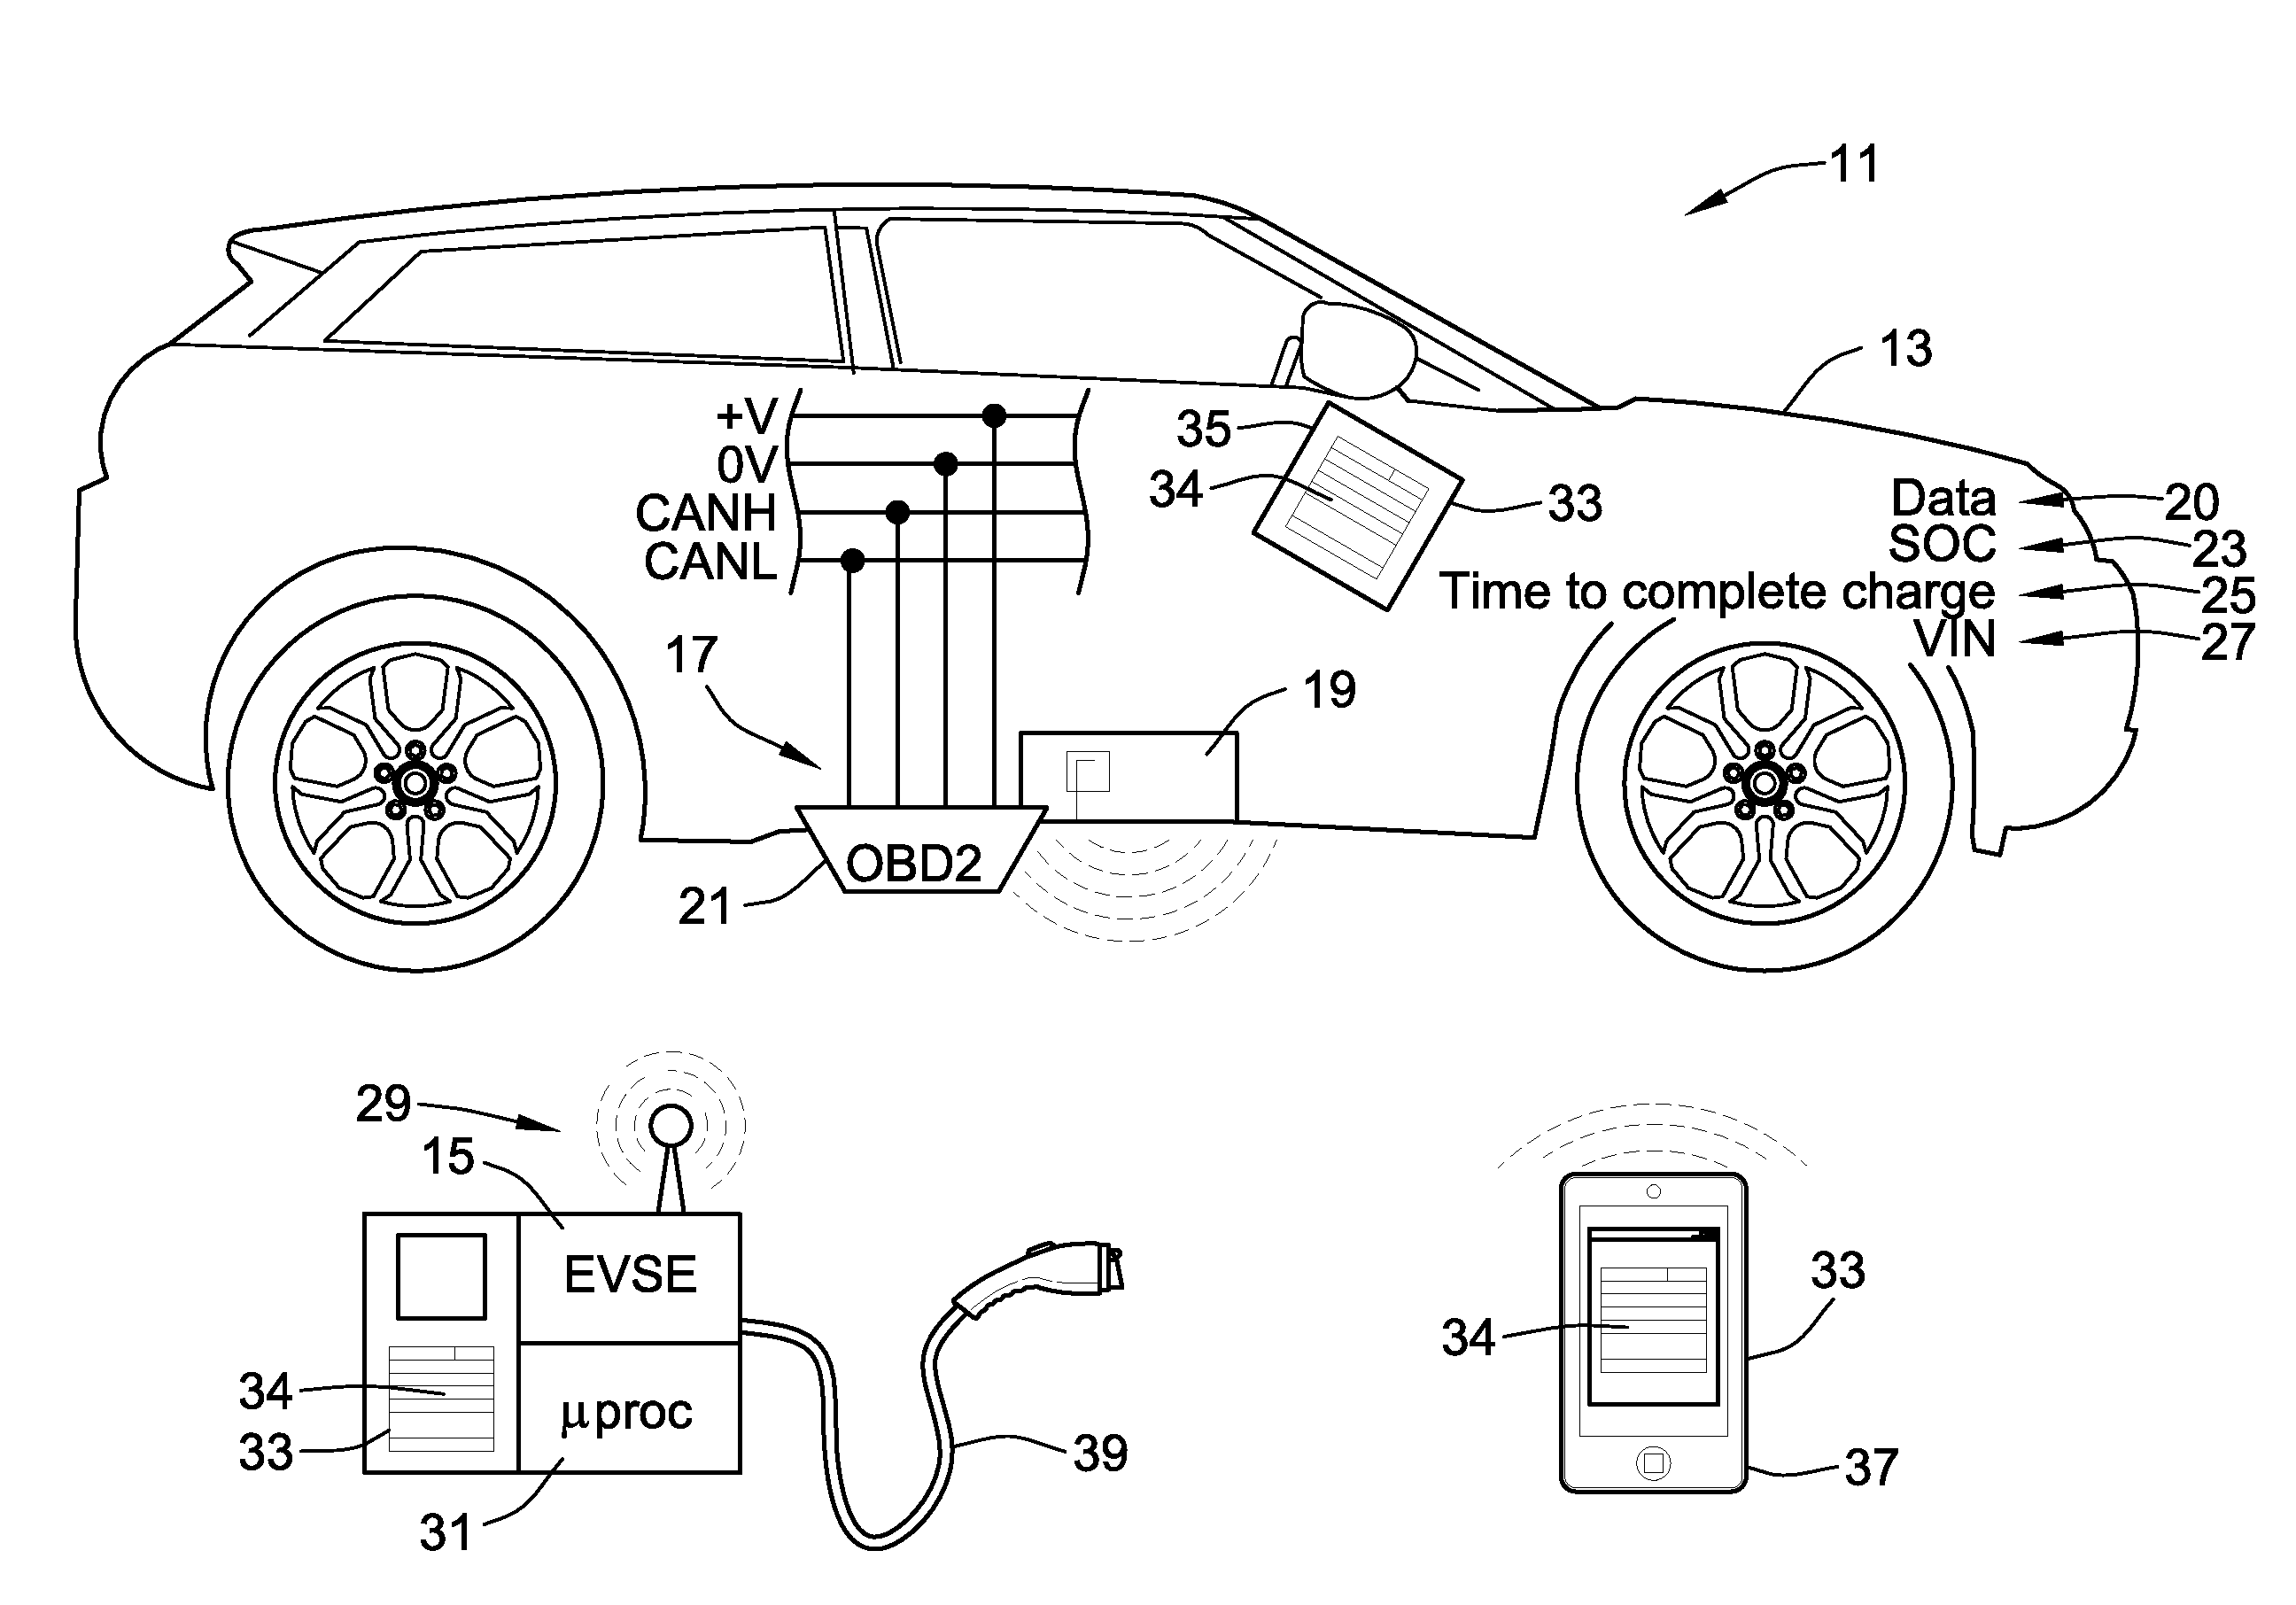 Direct Communications System for Charging Electric Vehicles